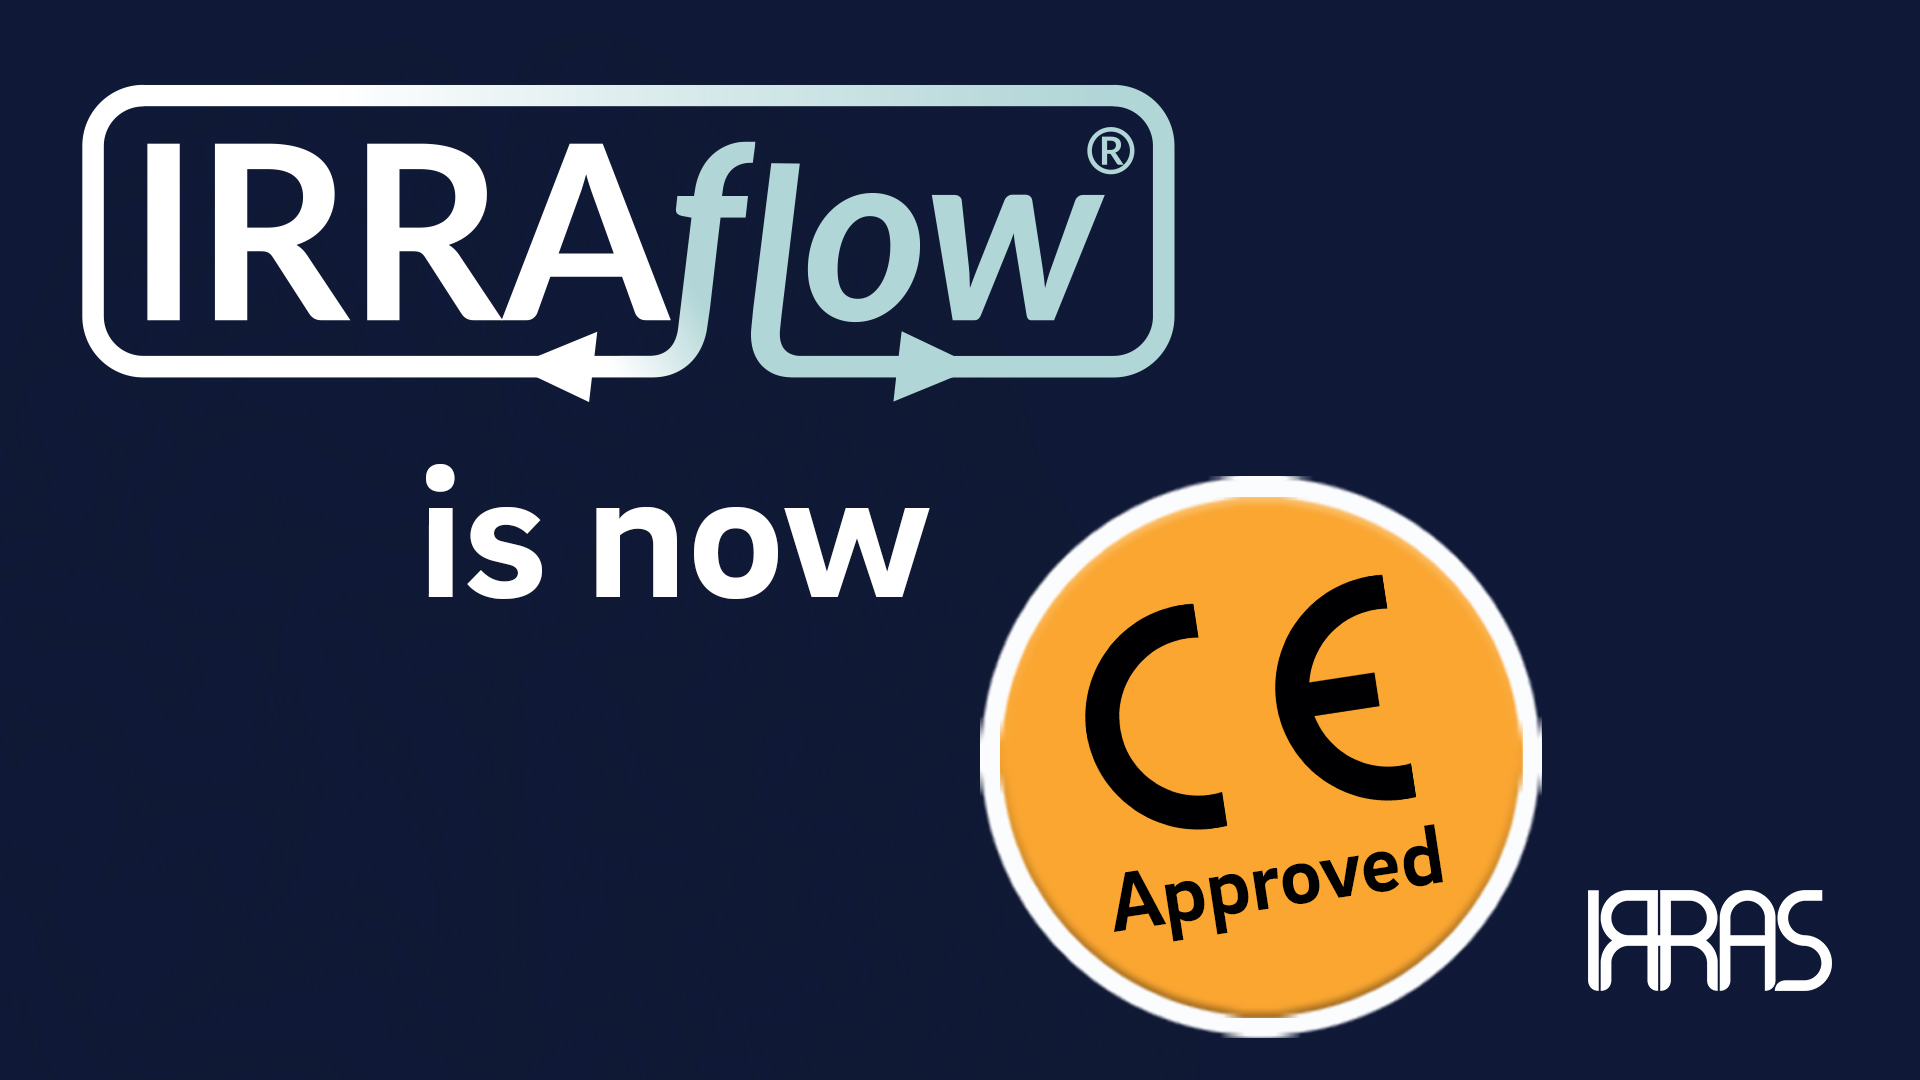 16_9 Ratio - IRRAflow_Now CE Mark Approved